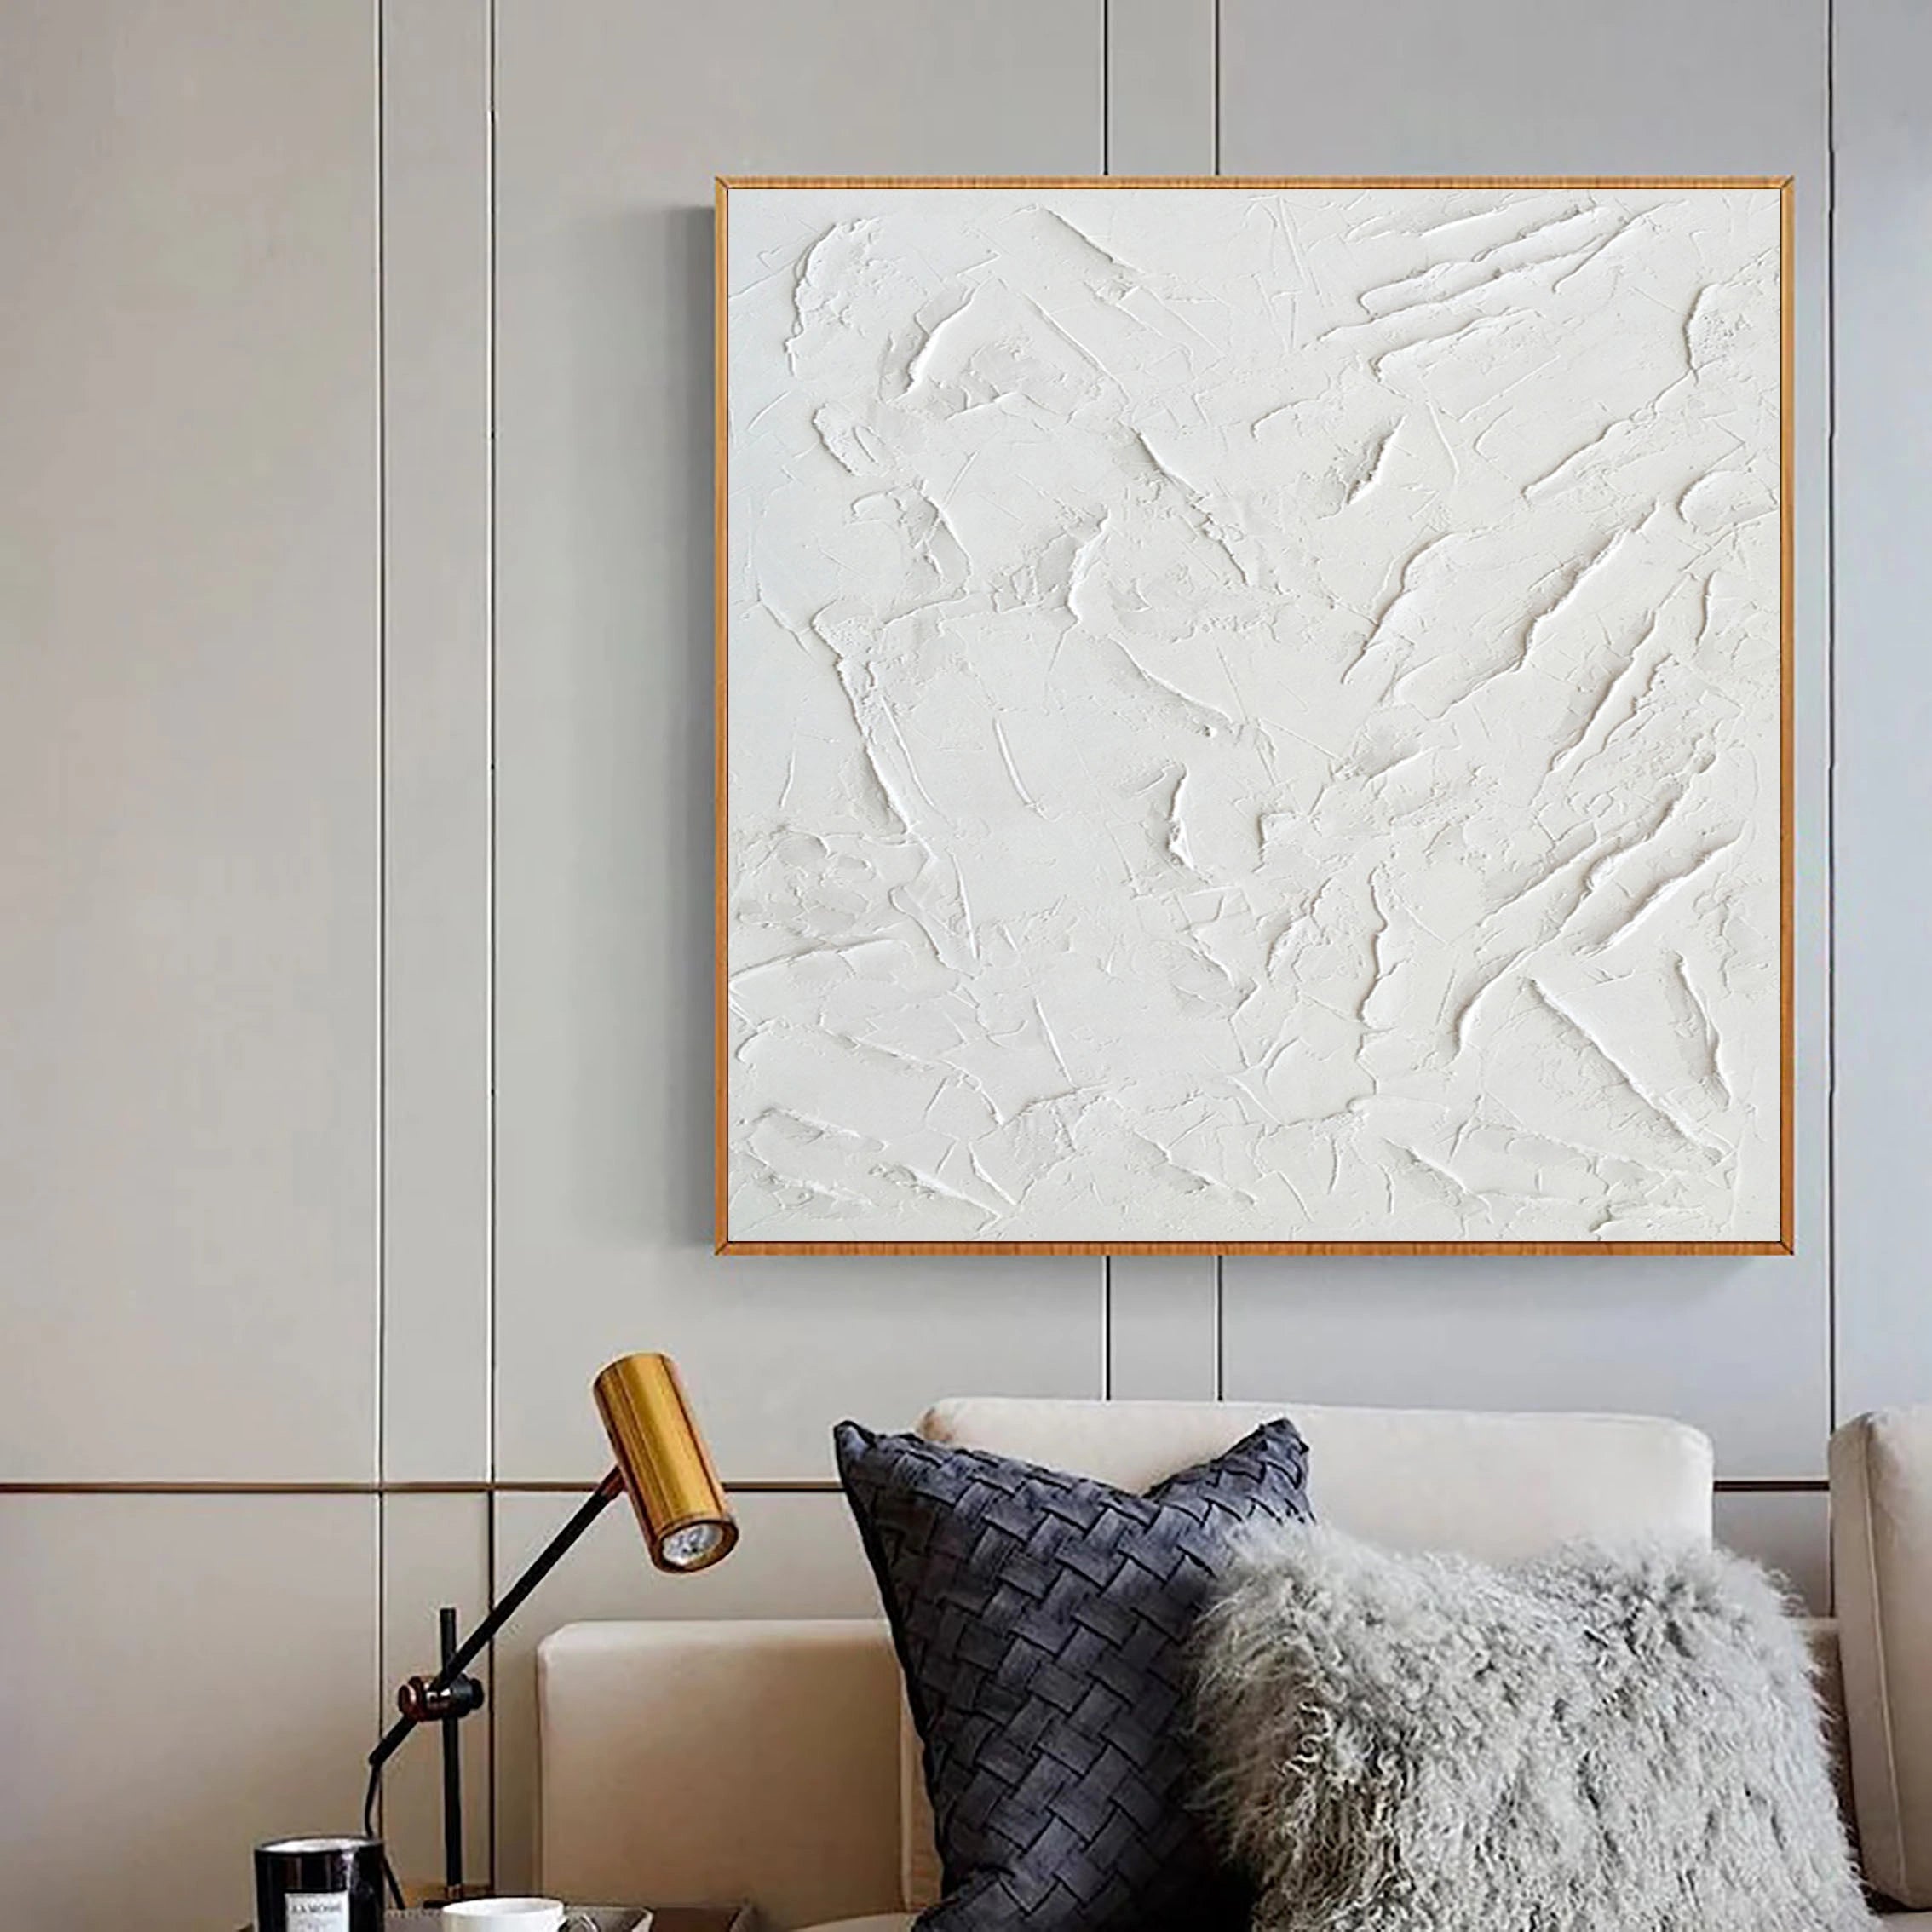 Minimalistic Plaster 3D Textured Painting on Canvas Original Handcrafted